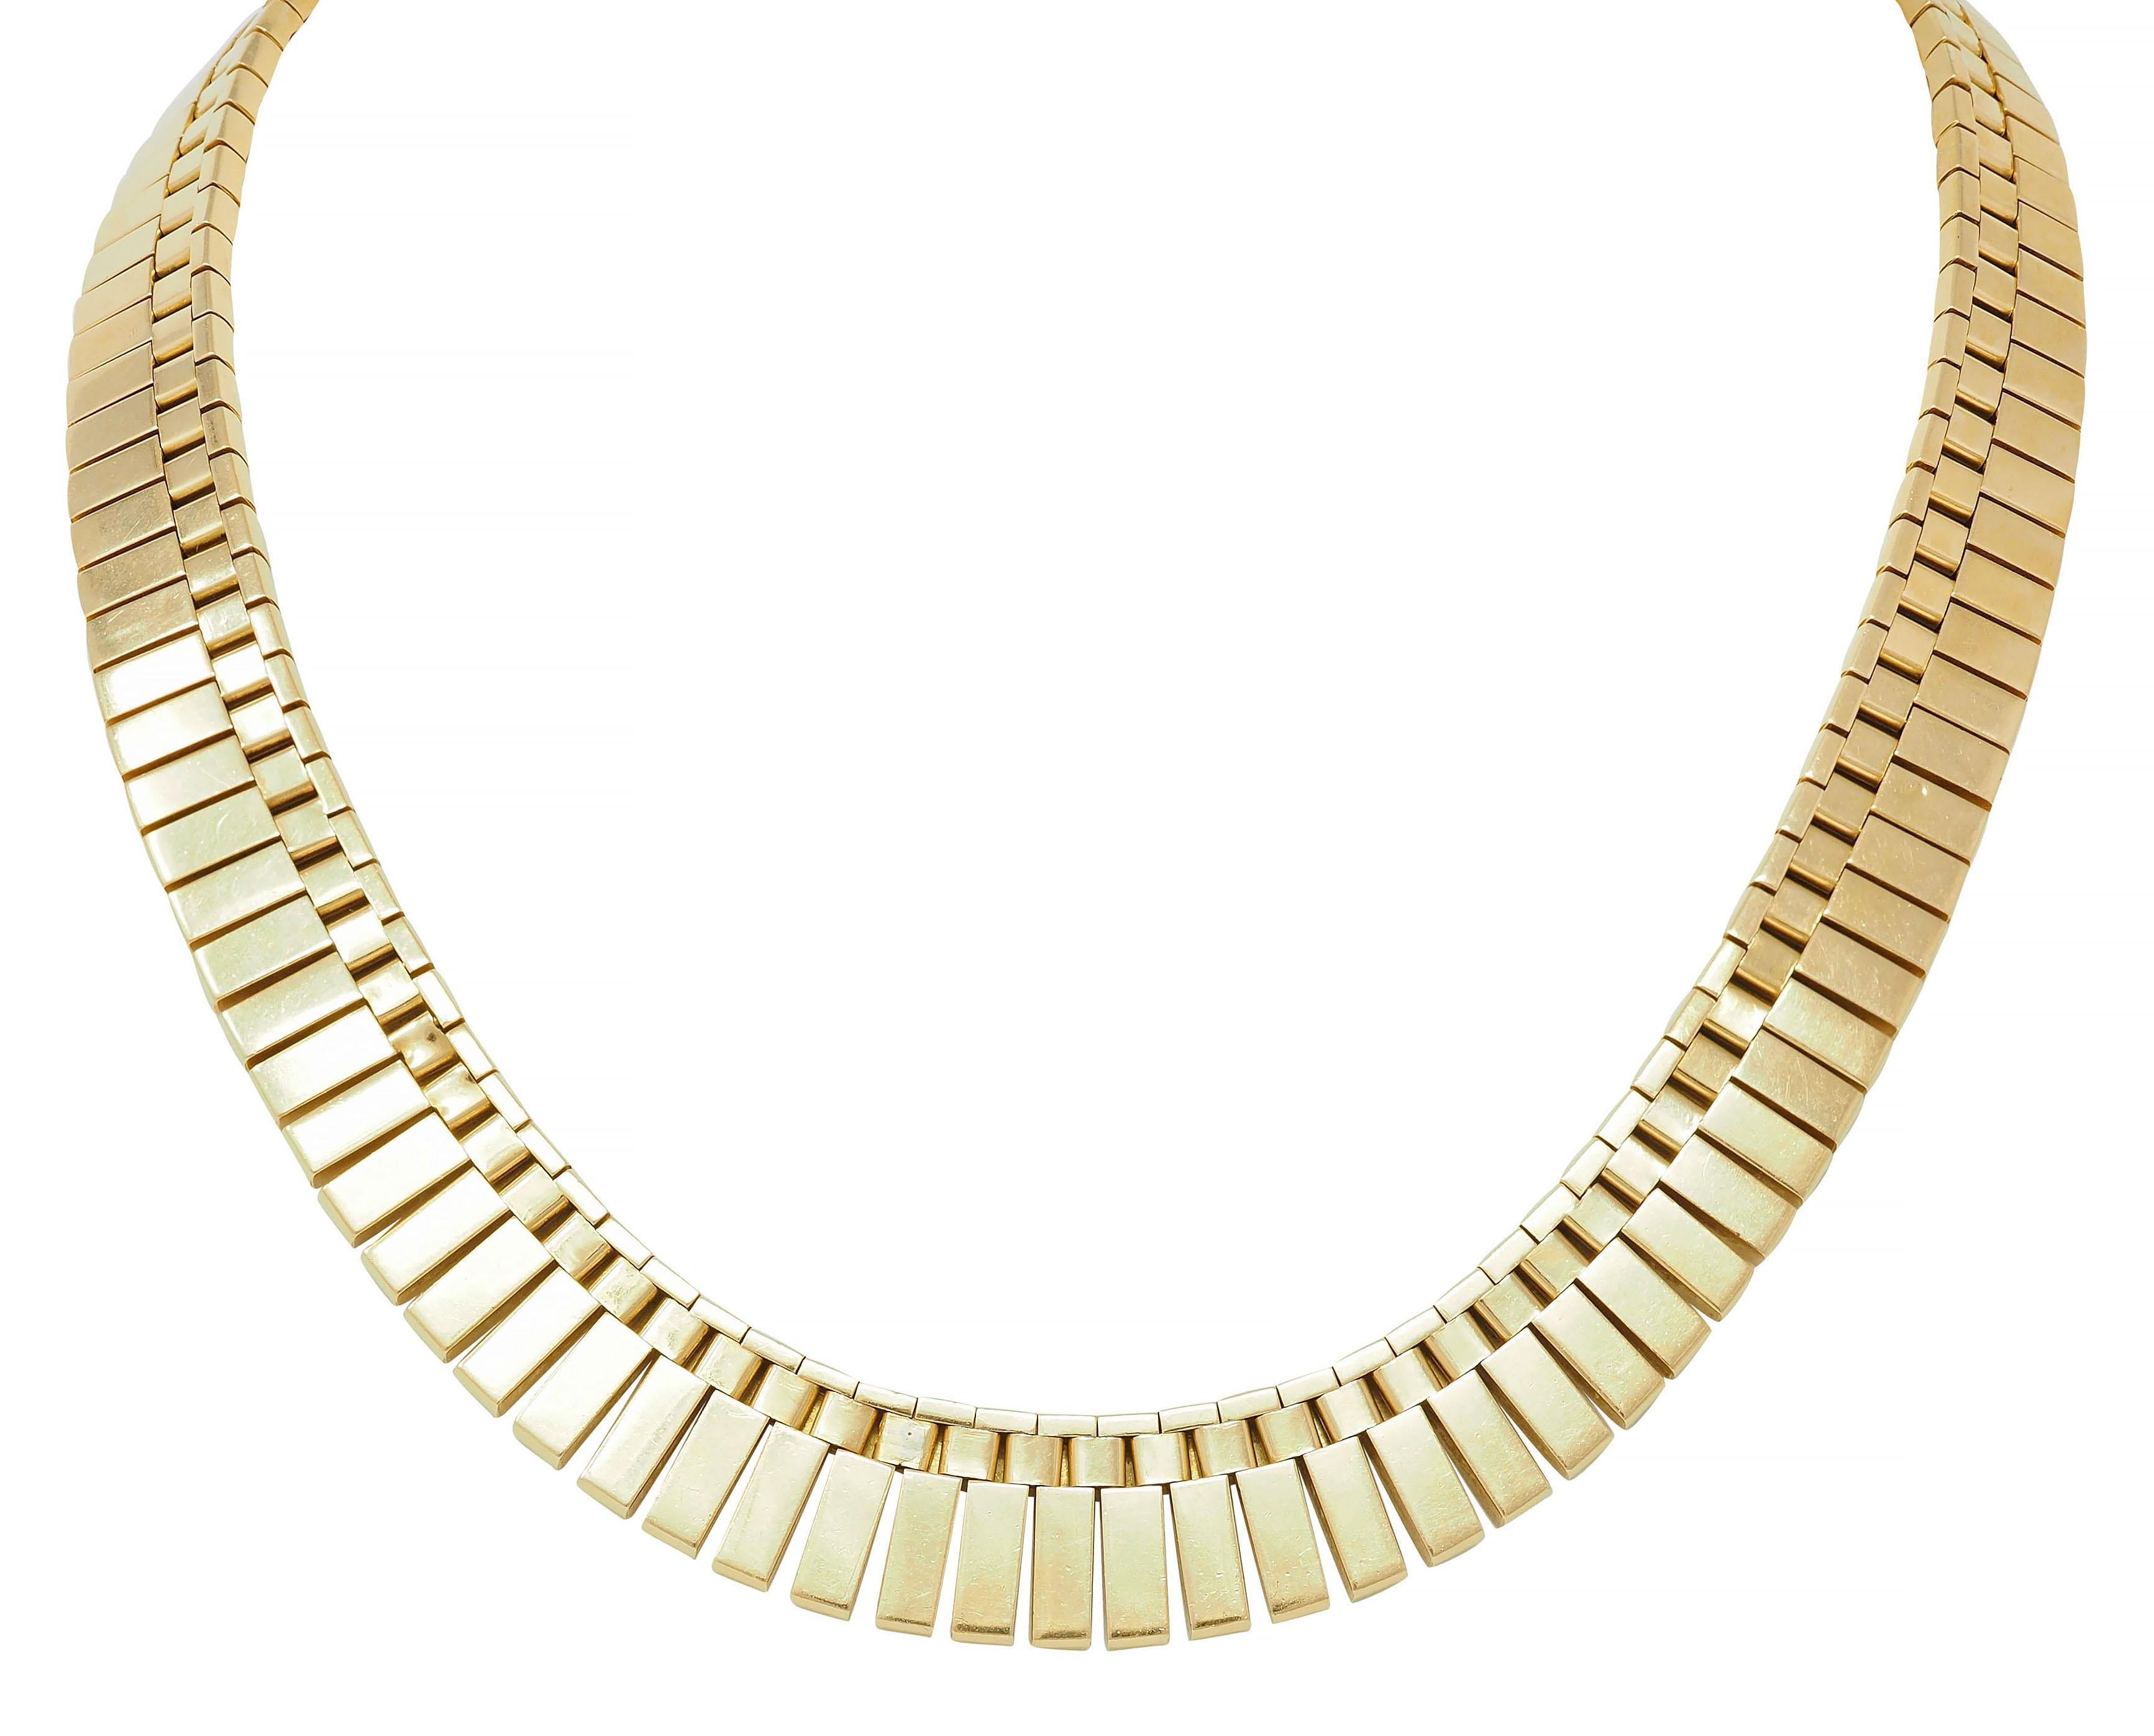 Cartier 1960's 18 Karat Yellow Gold Wave Link Modernist Vintage Necklace In Excellent Condition For Sale In Philadelphia, PA